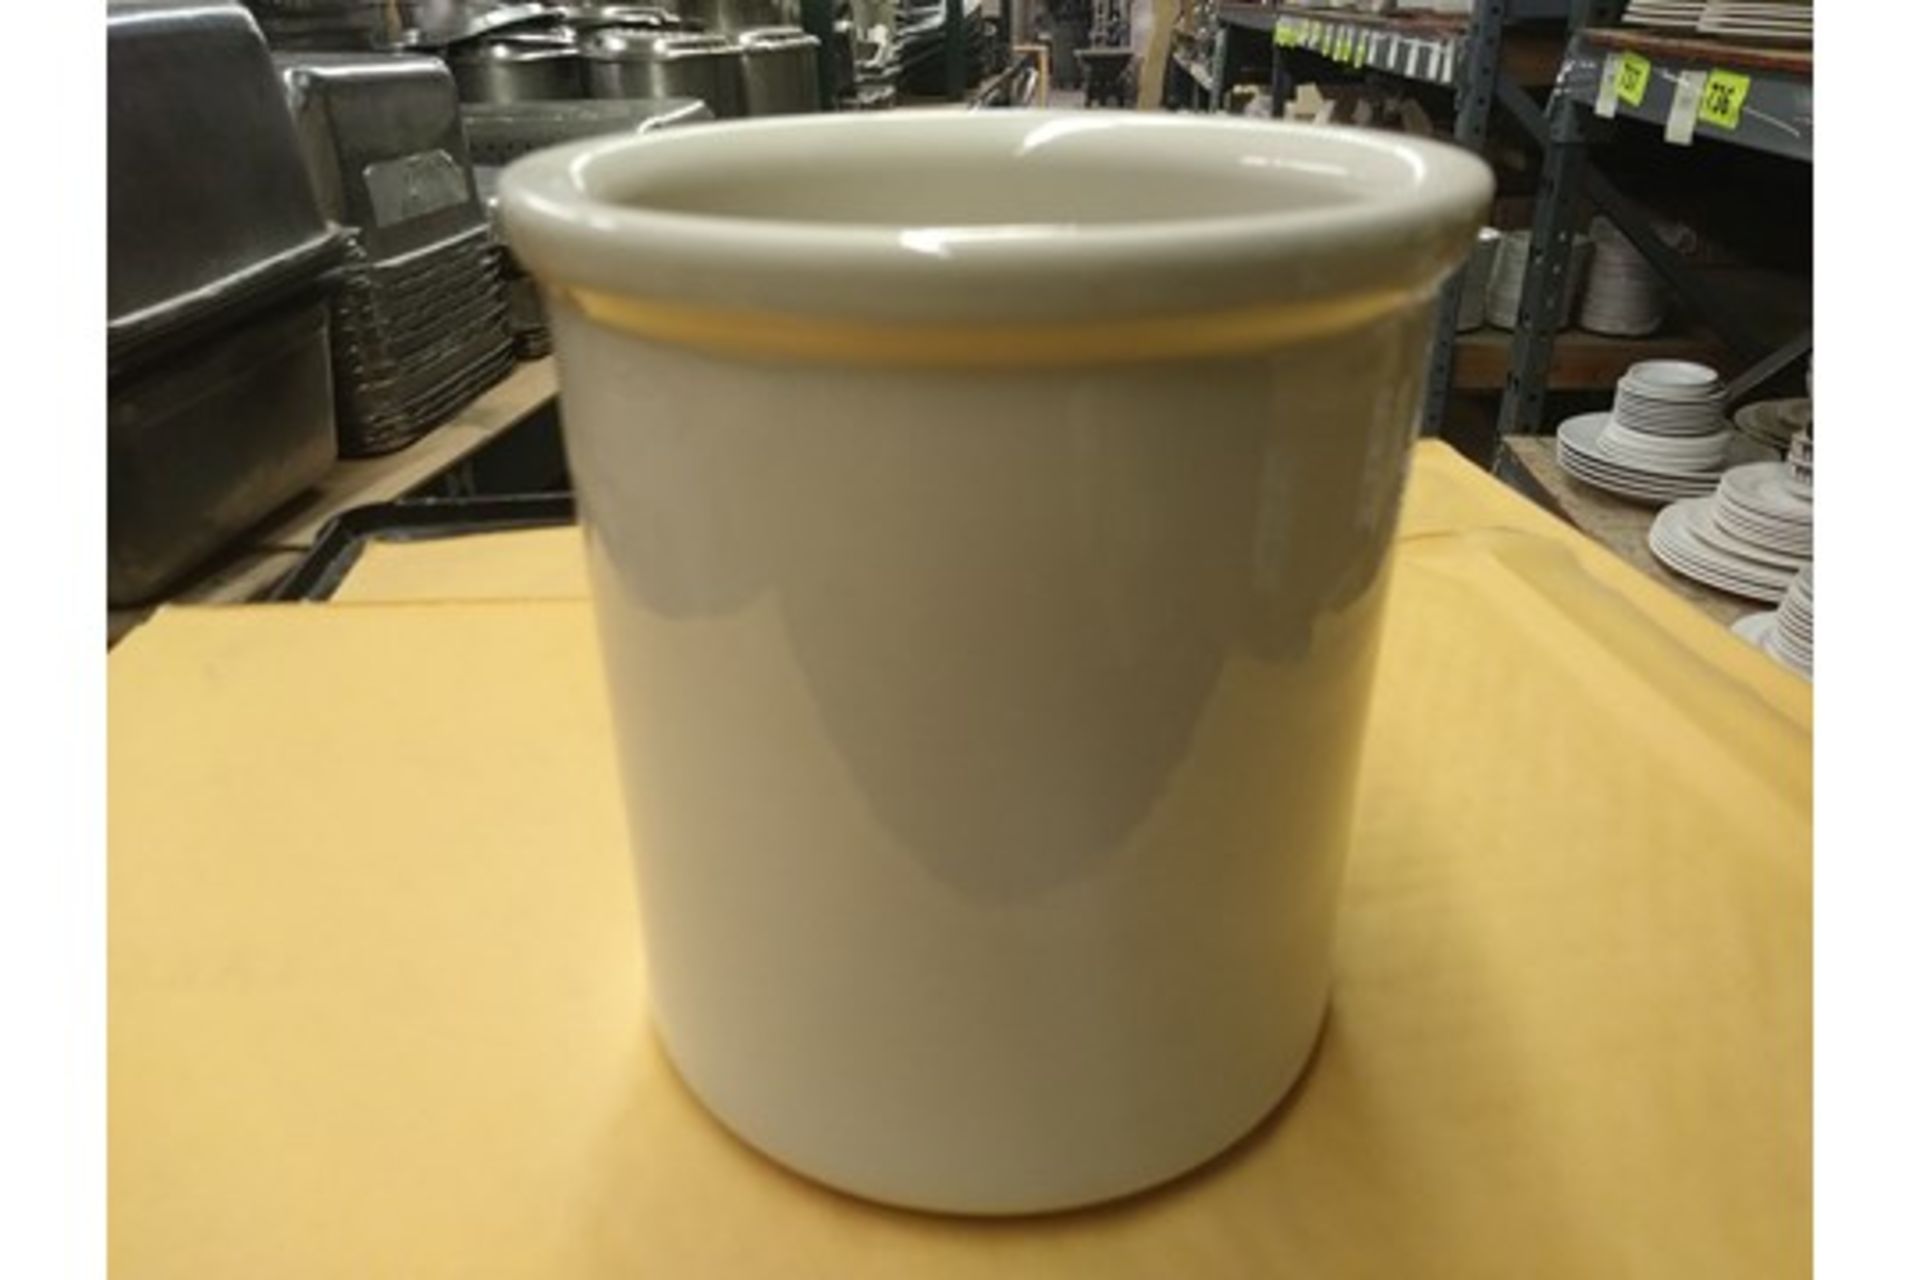 6.5" DIA. WHITE BAIN MARIE JARS 8" TALL (includes approx QTY 21 in this lot)